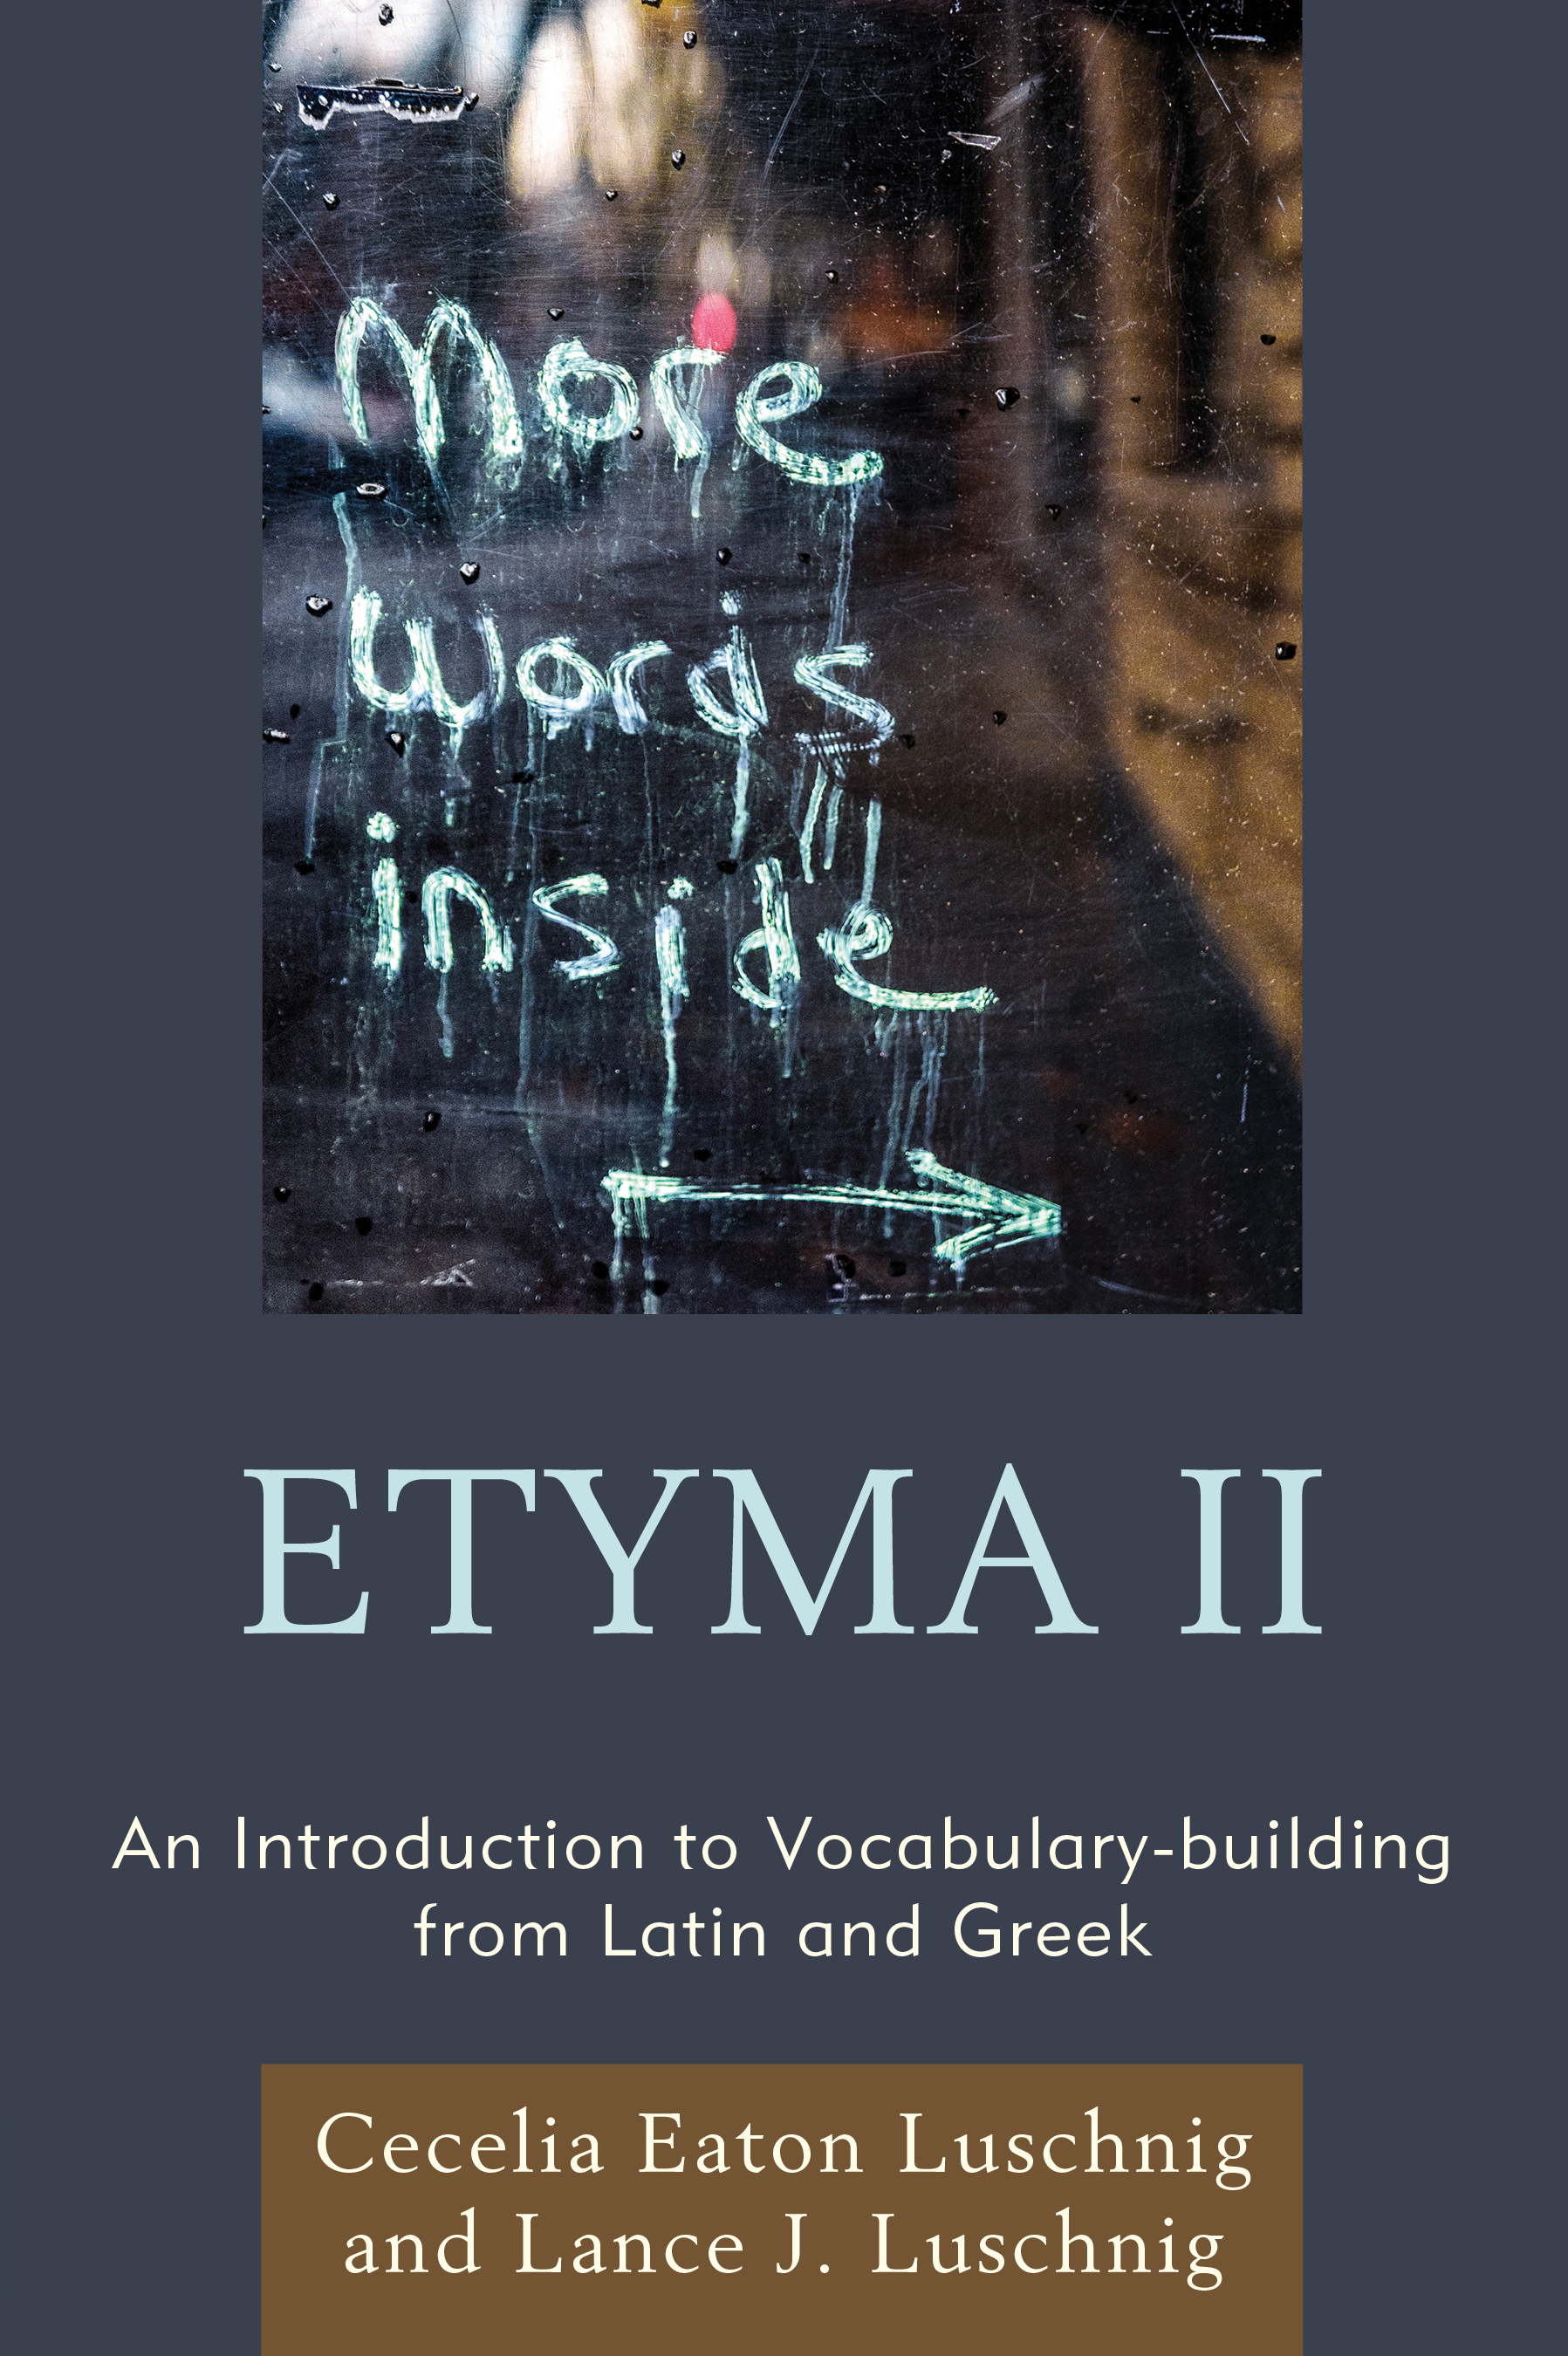 ETYMA Two: An Introduction to Vocabulary Building from Latin and Greek